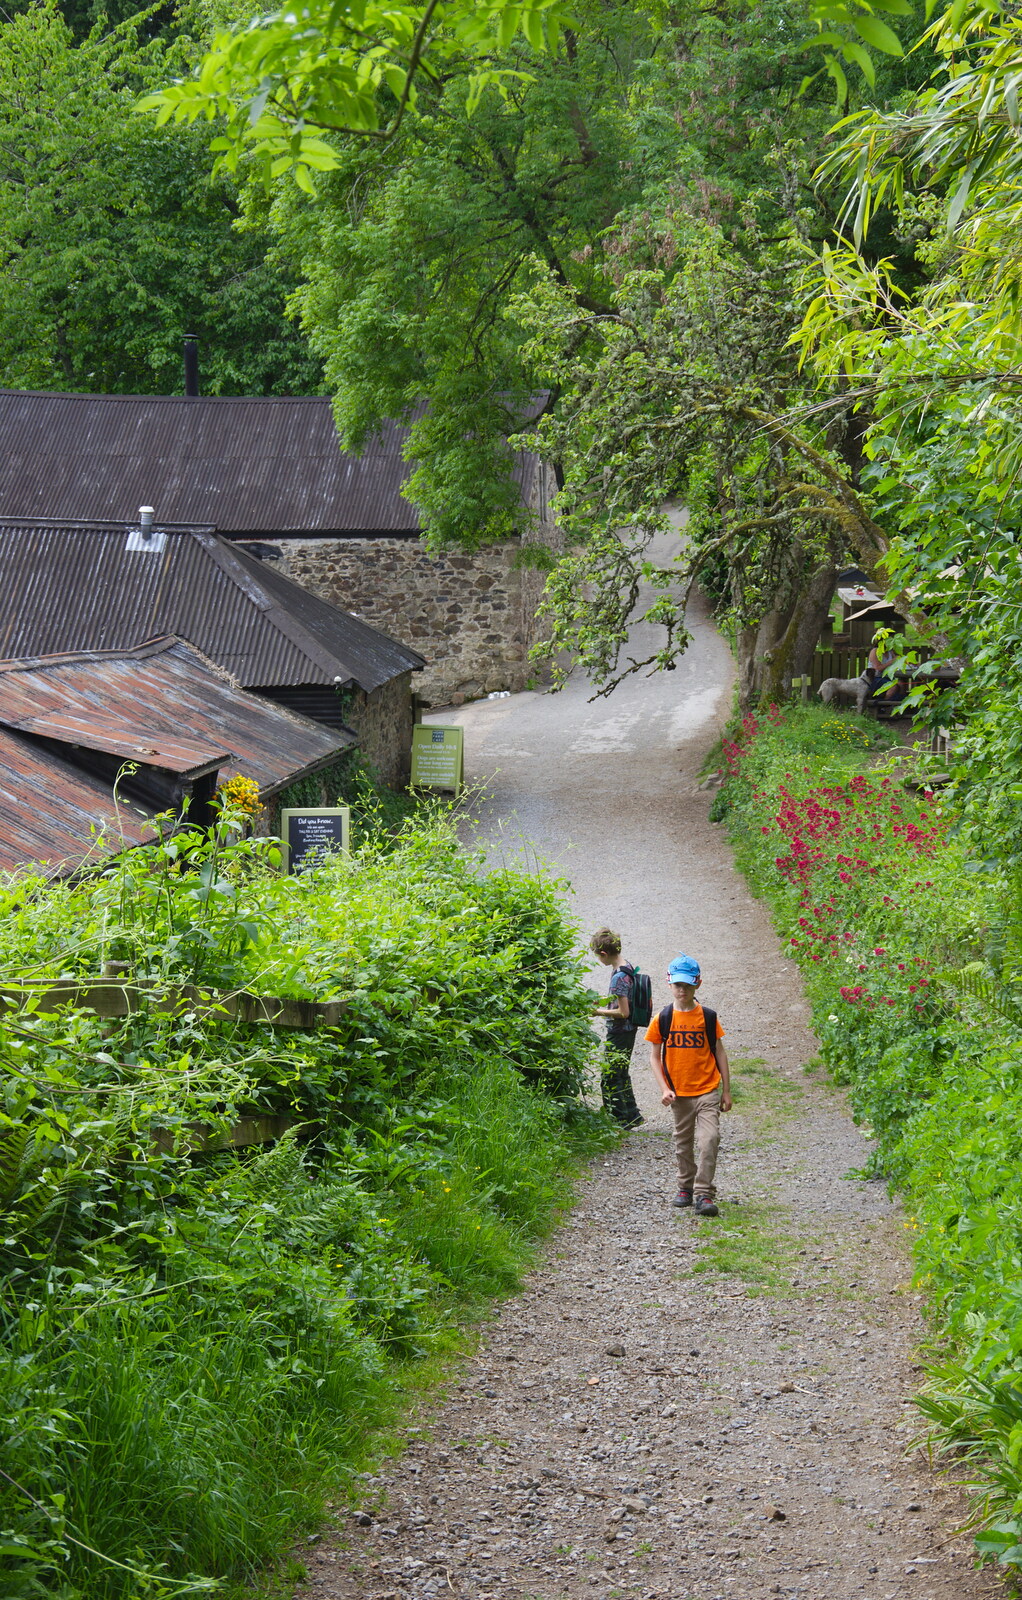 The boys on a path from Chagford Lido and a Trip to Parke, Bovey Tracey, Devon - 25th May 2019